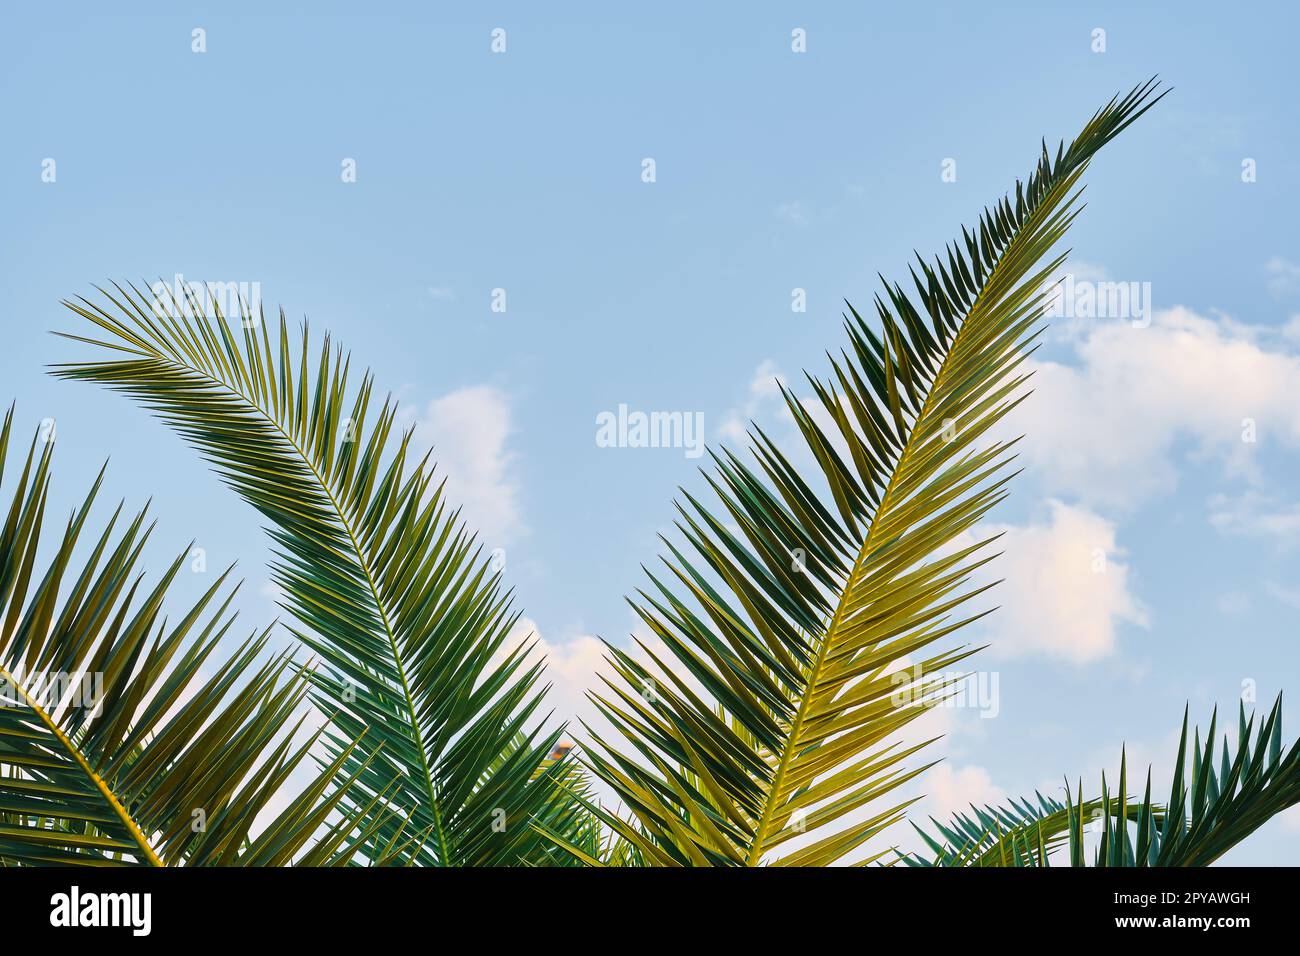 Palm leaves close-up against the background of blue sky, screensavers ...